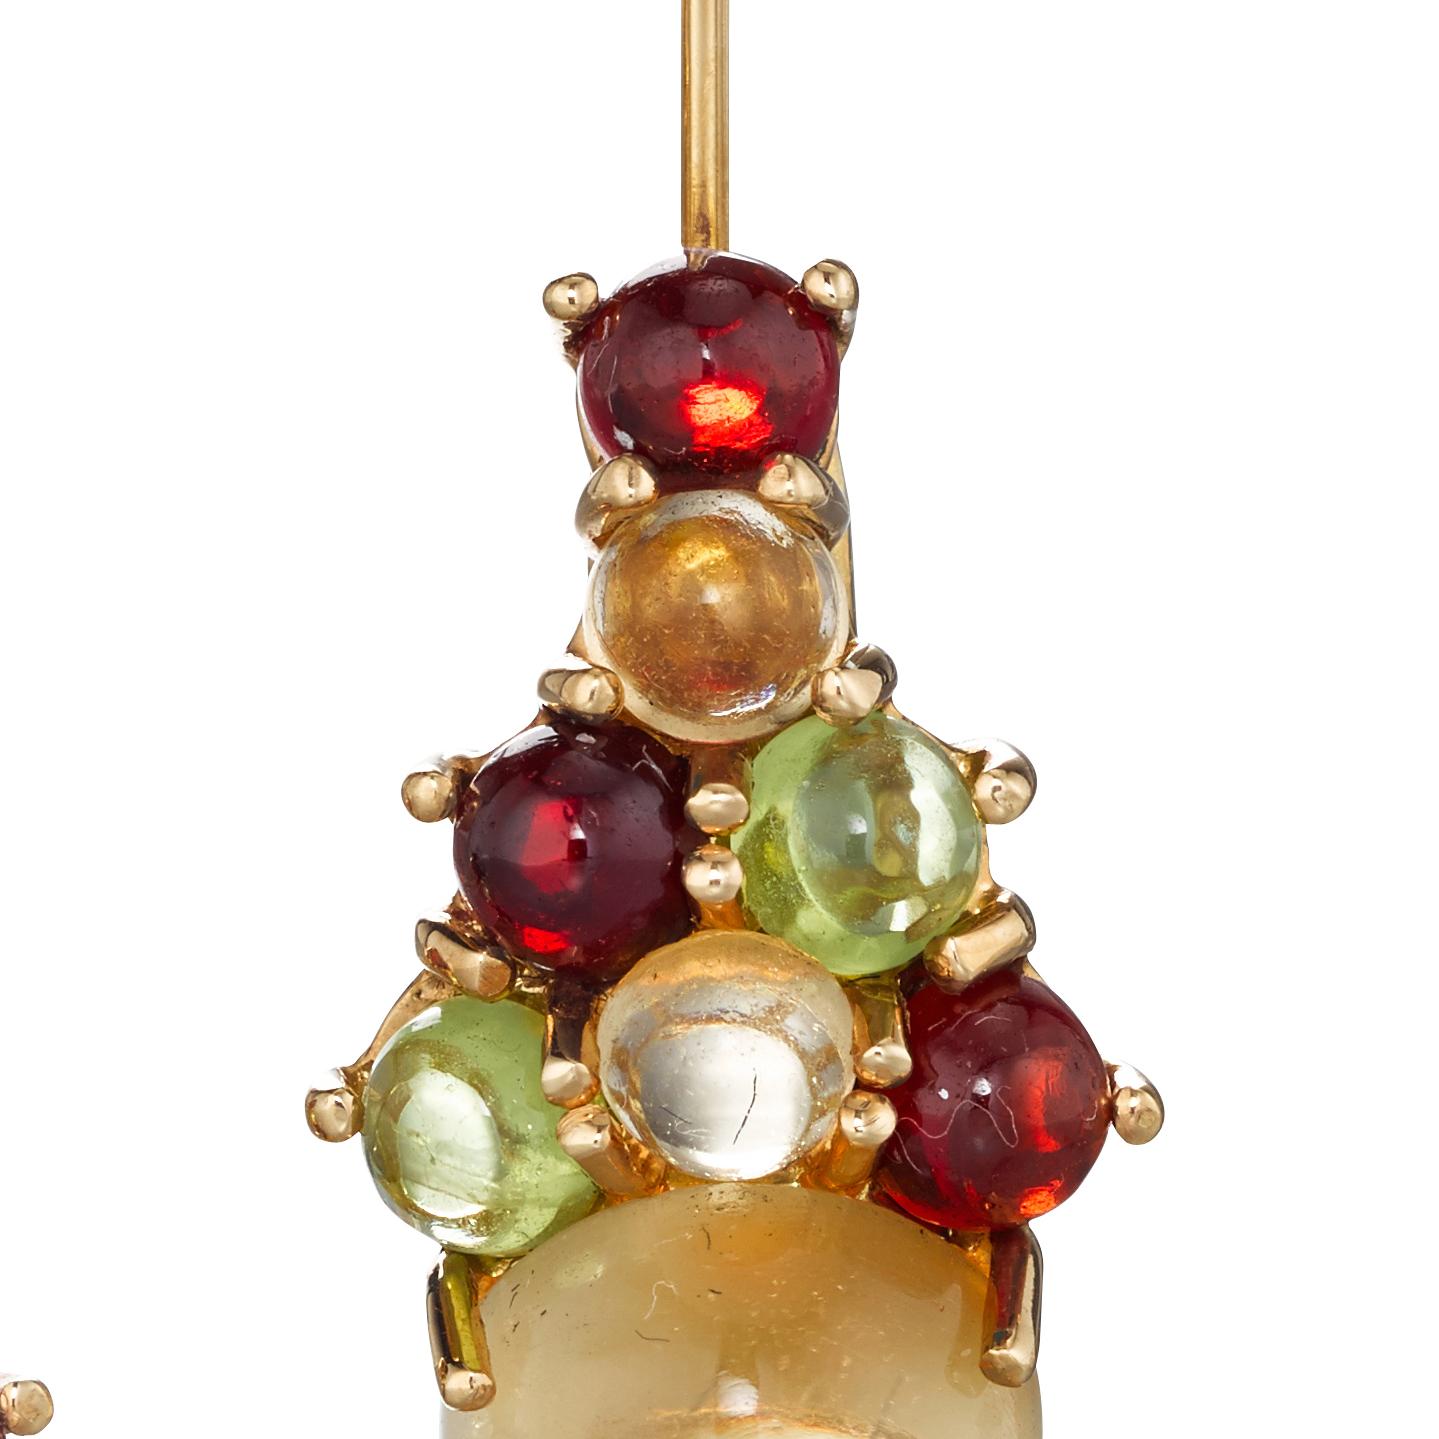 A colorful bundle of stones suspended from a delicate wire. Set in 18k yellow gold, a medley of peridot, citrine, red garnet, pale blue topaz sit atop an 8mm cabochon-cut citrine. For pierced ears.

Daria de Koning’s one-of-a-kind cabochon-centric